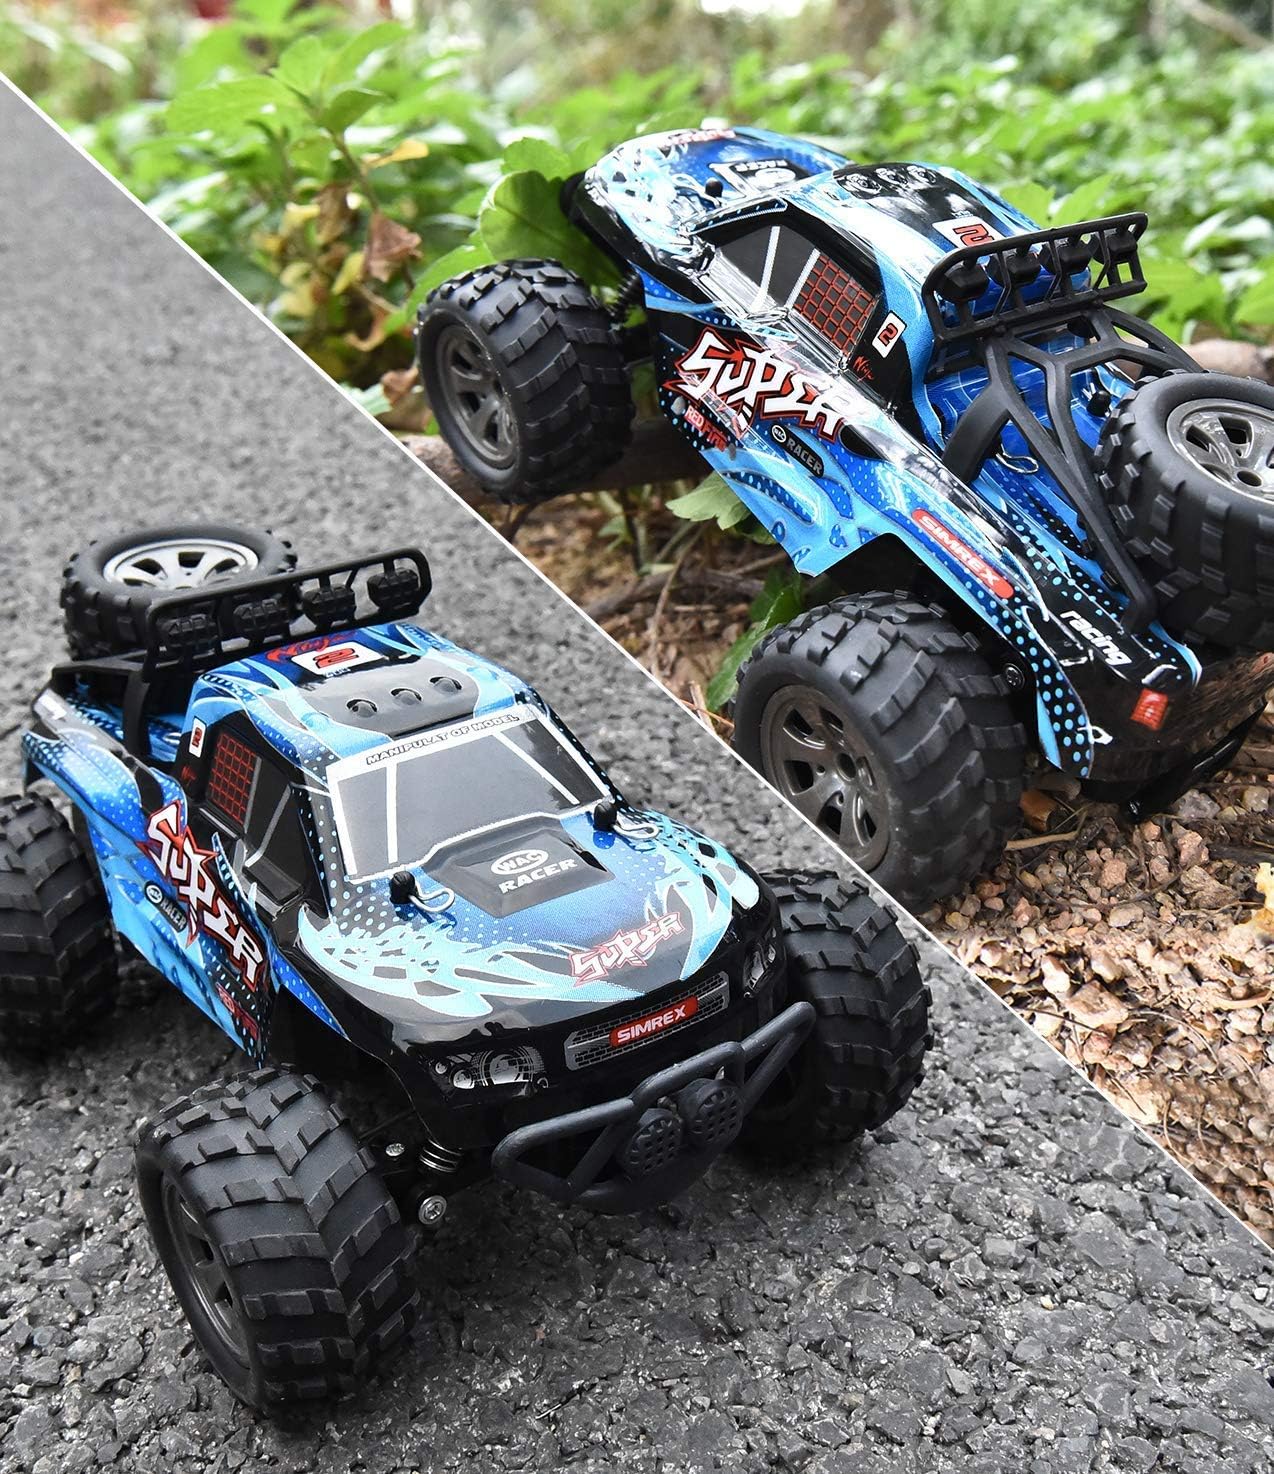 SIMREX A240 Radio-controlled toy vehicles High Speed 20KM/H Scale RTR Remote Control Brushed Monster Truck Off Road Car Big Foot RC 2WD Electric Power Buggy W/2.4G Challenger